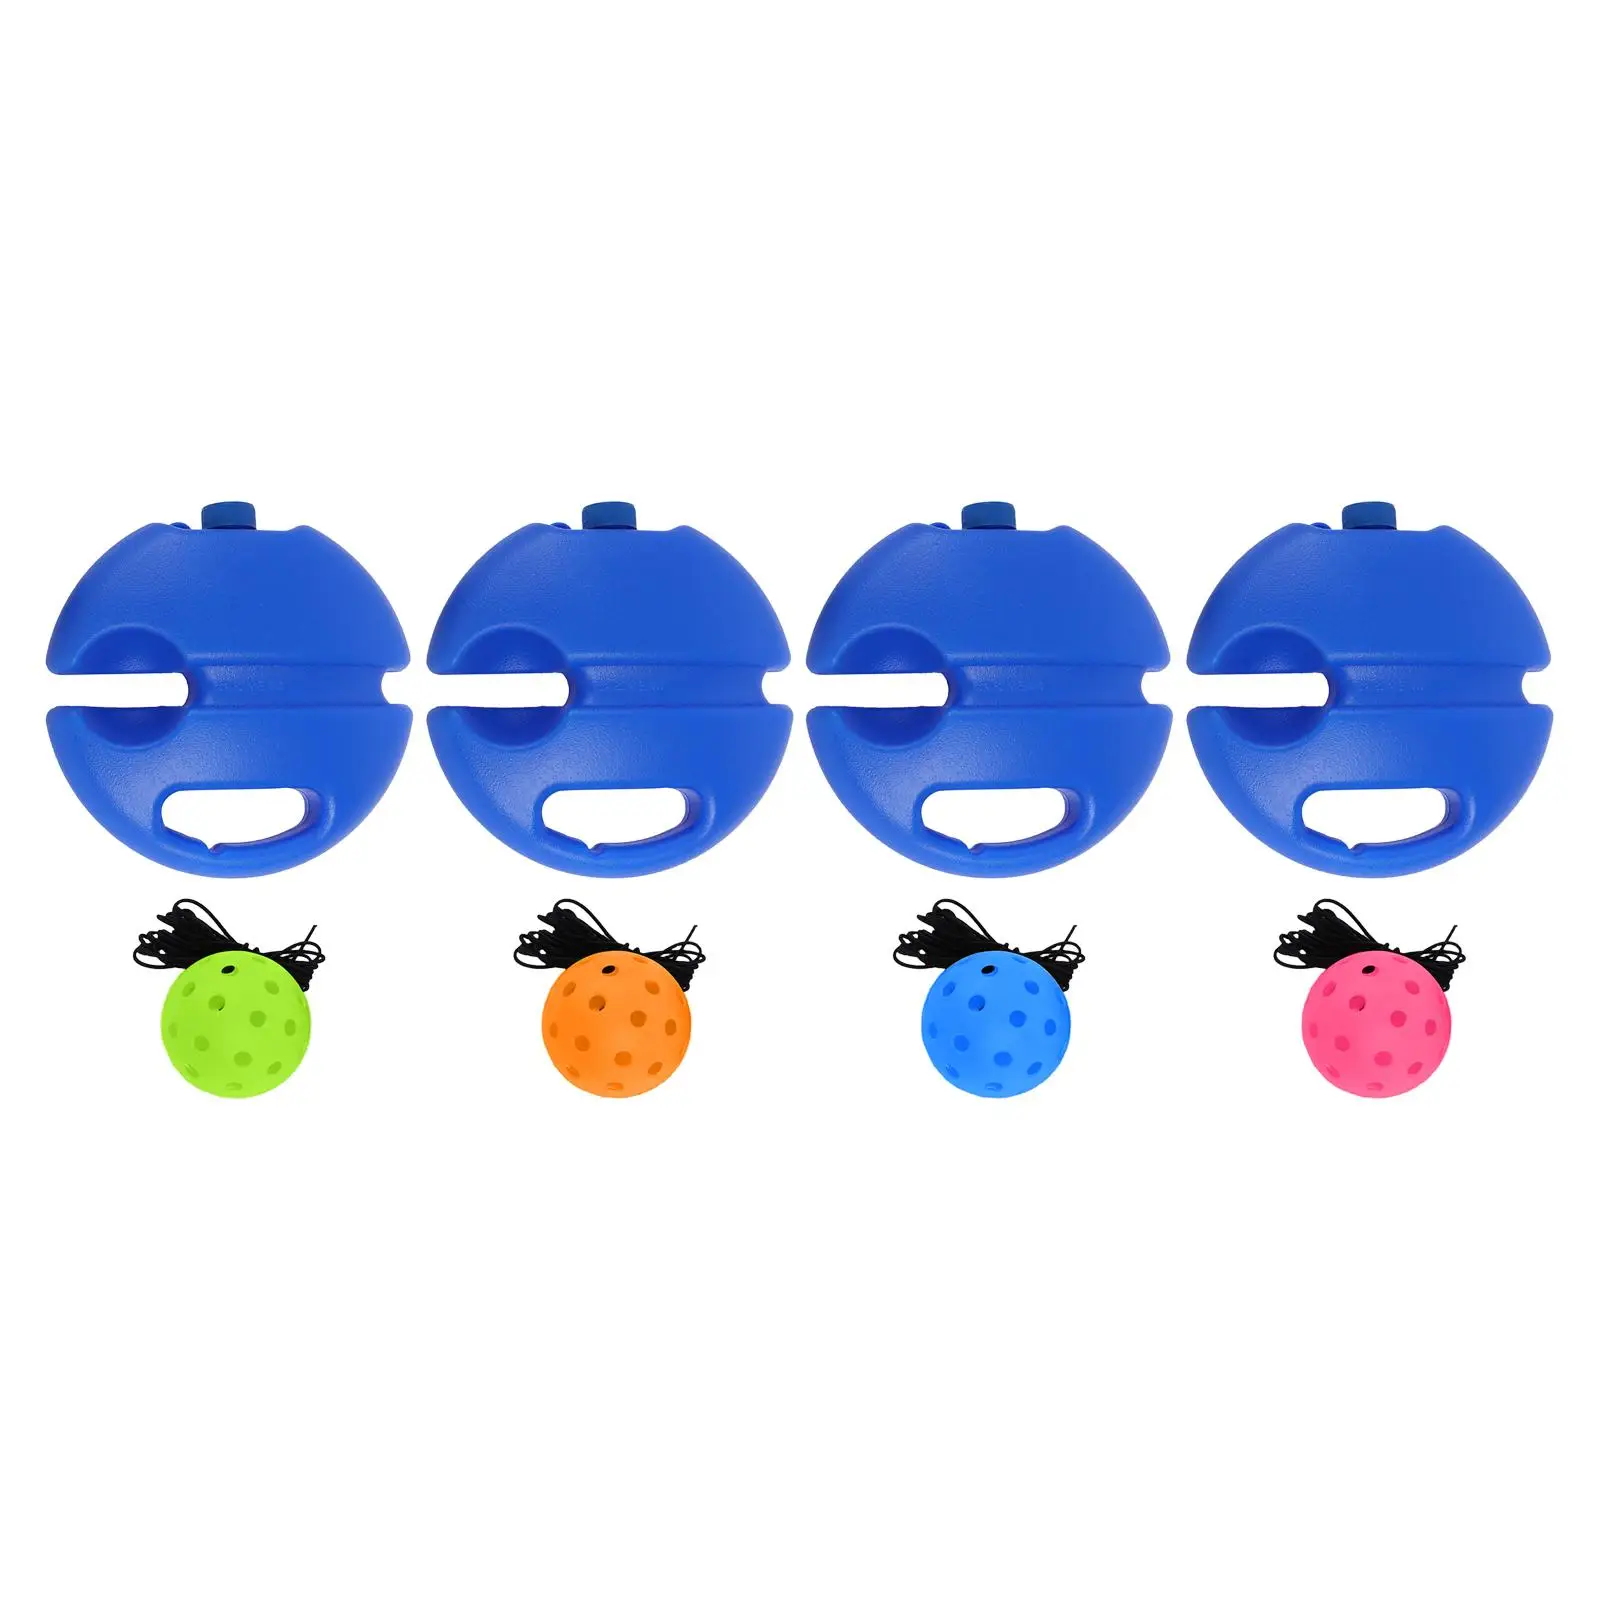 Pickleball Trainer with 40 Holes Pickleball Ball Pickleball Accessories Pickleball Training Aid for Sport Single Player Adult